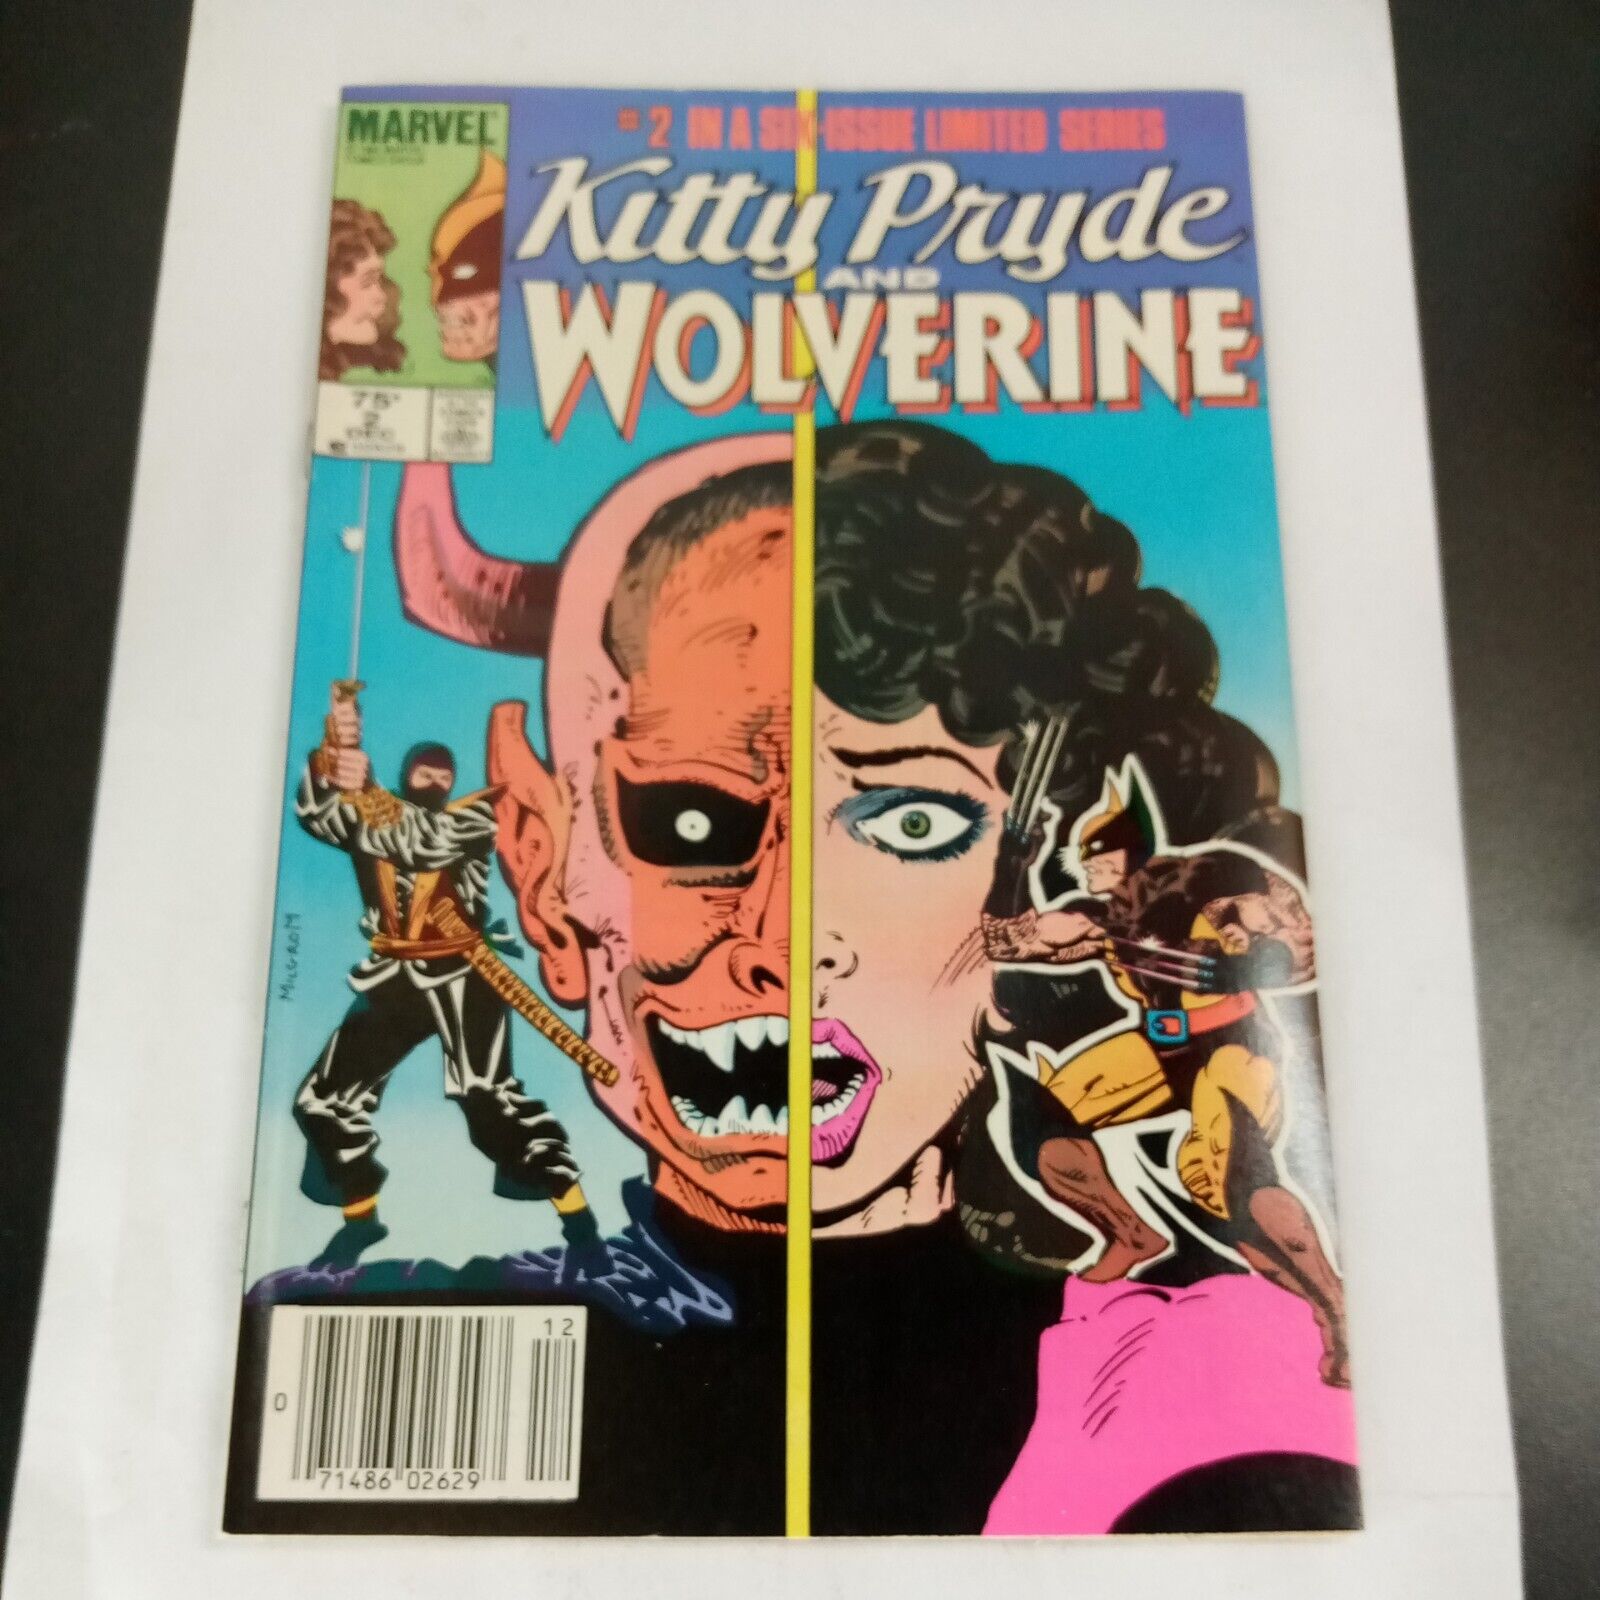 Marvel Comics Kitty Pryde And Wolverine #2 In Limited Series Dec. 1984